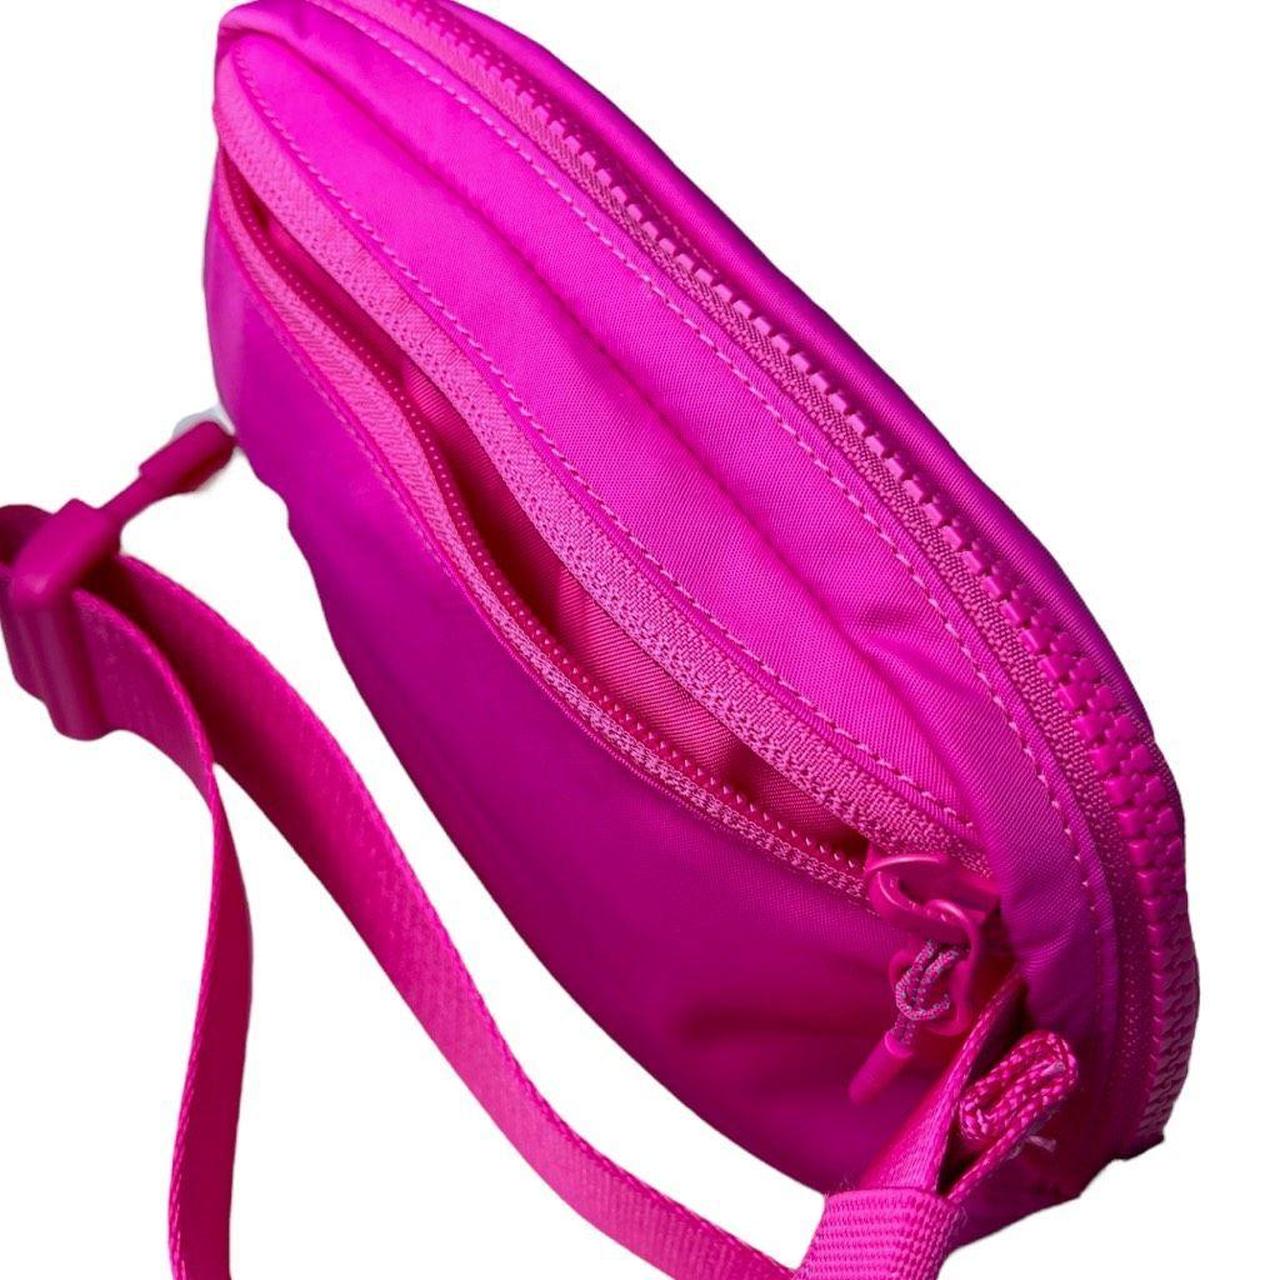 Lululemon Sonic Pink Everywhere Belt Bag With Tags - $60 - From Annabel